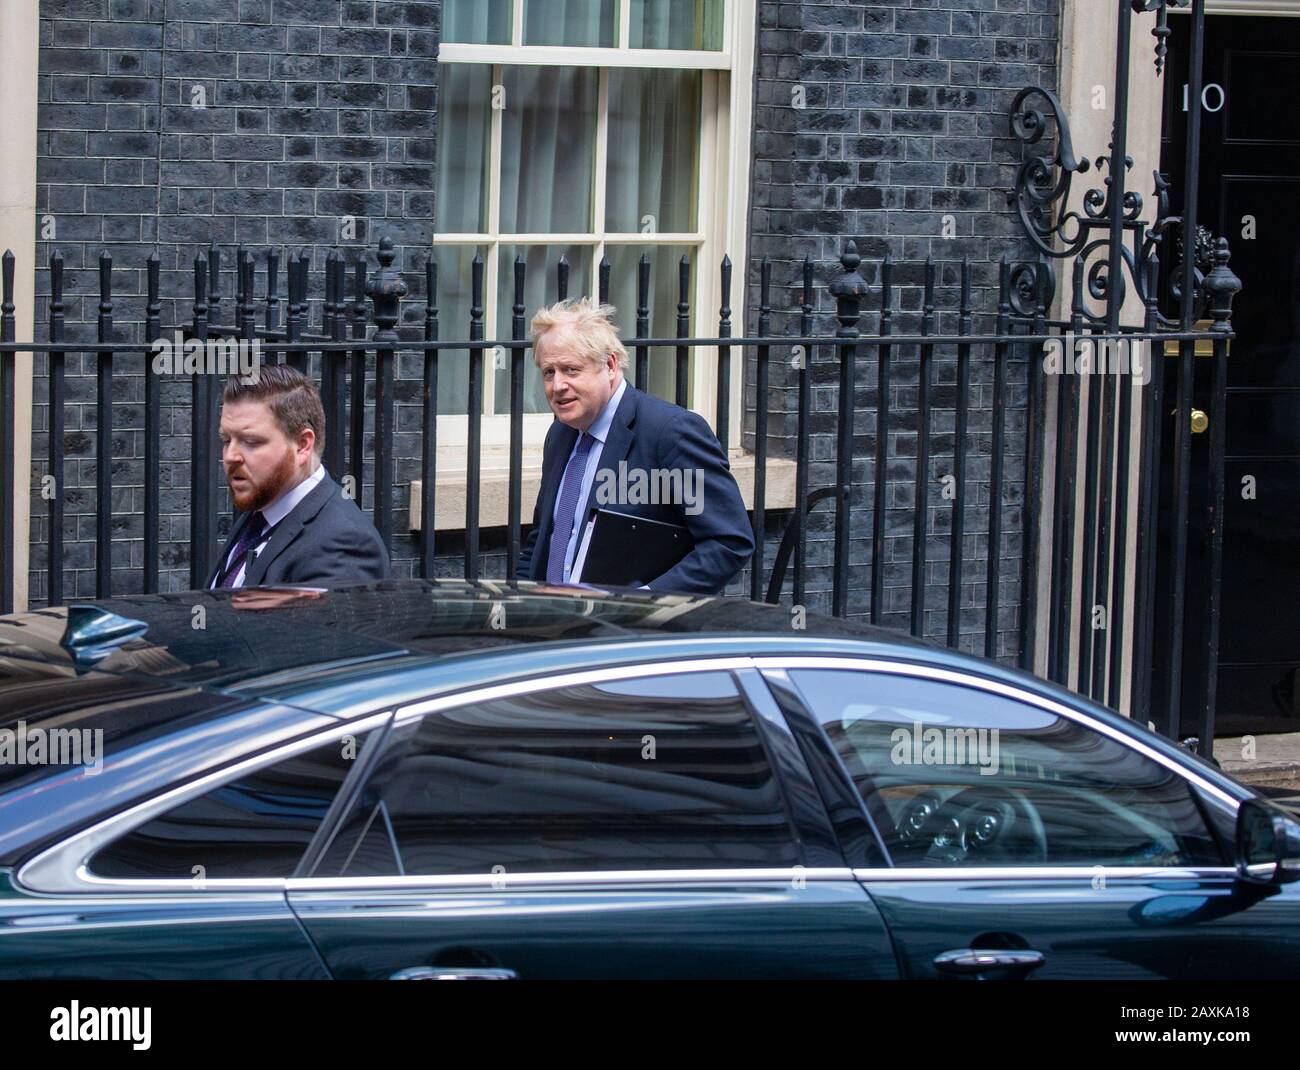 London, UK. 12th Feb, 2020. British Prime Minister, Boris Johnson, leaves Number 10 Downing Street to go to the House of Commons for Prime Minister's Questions. He will be facing questions from the Opposition about his announcement to go ahead with the High Speed Rail project, known as HS2. Credit: Tommy London/Alamy Live News Stock Photo